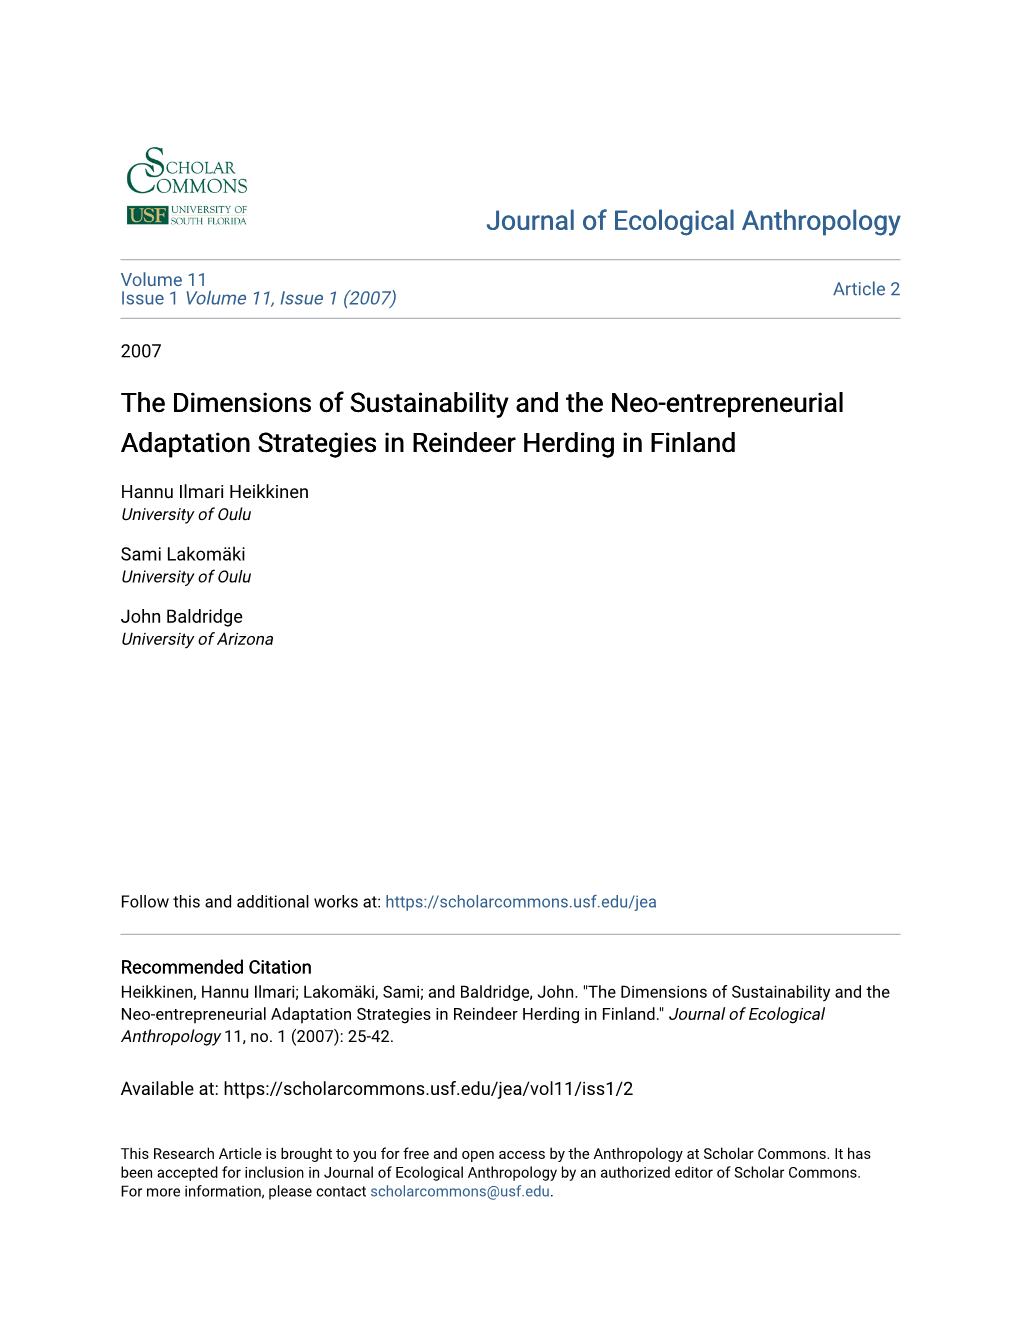 The Dimensions of Sustainability and the Neo-Entrepreneurial Adaptation Strategies in Reindeer Herding in Finland